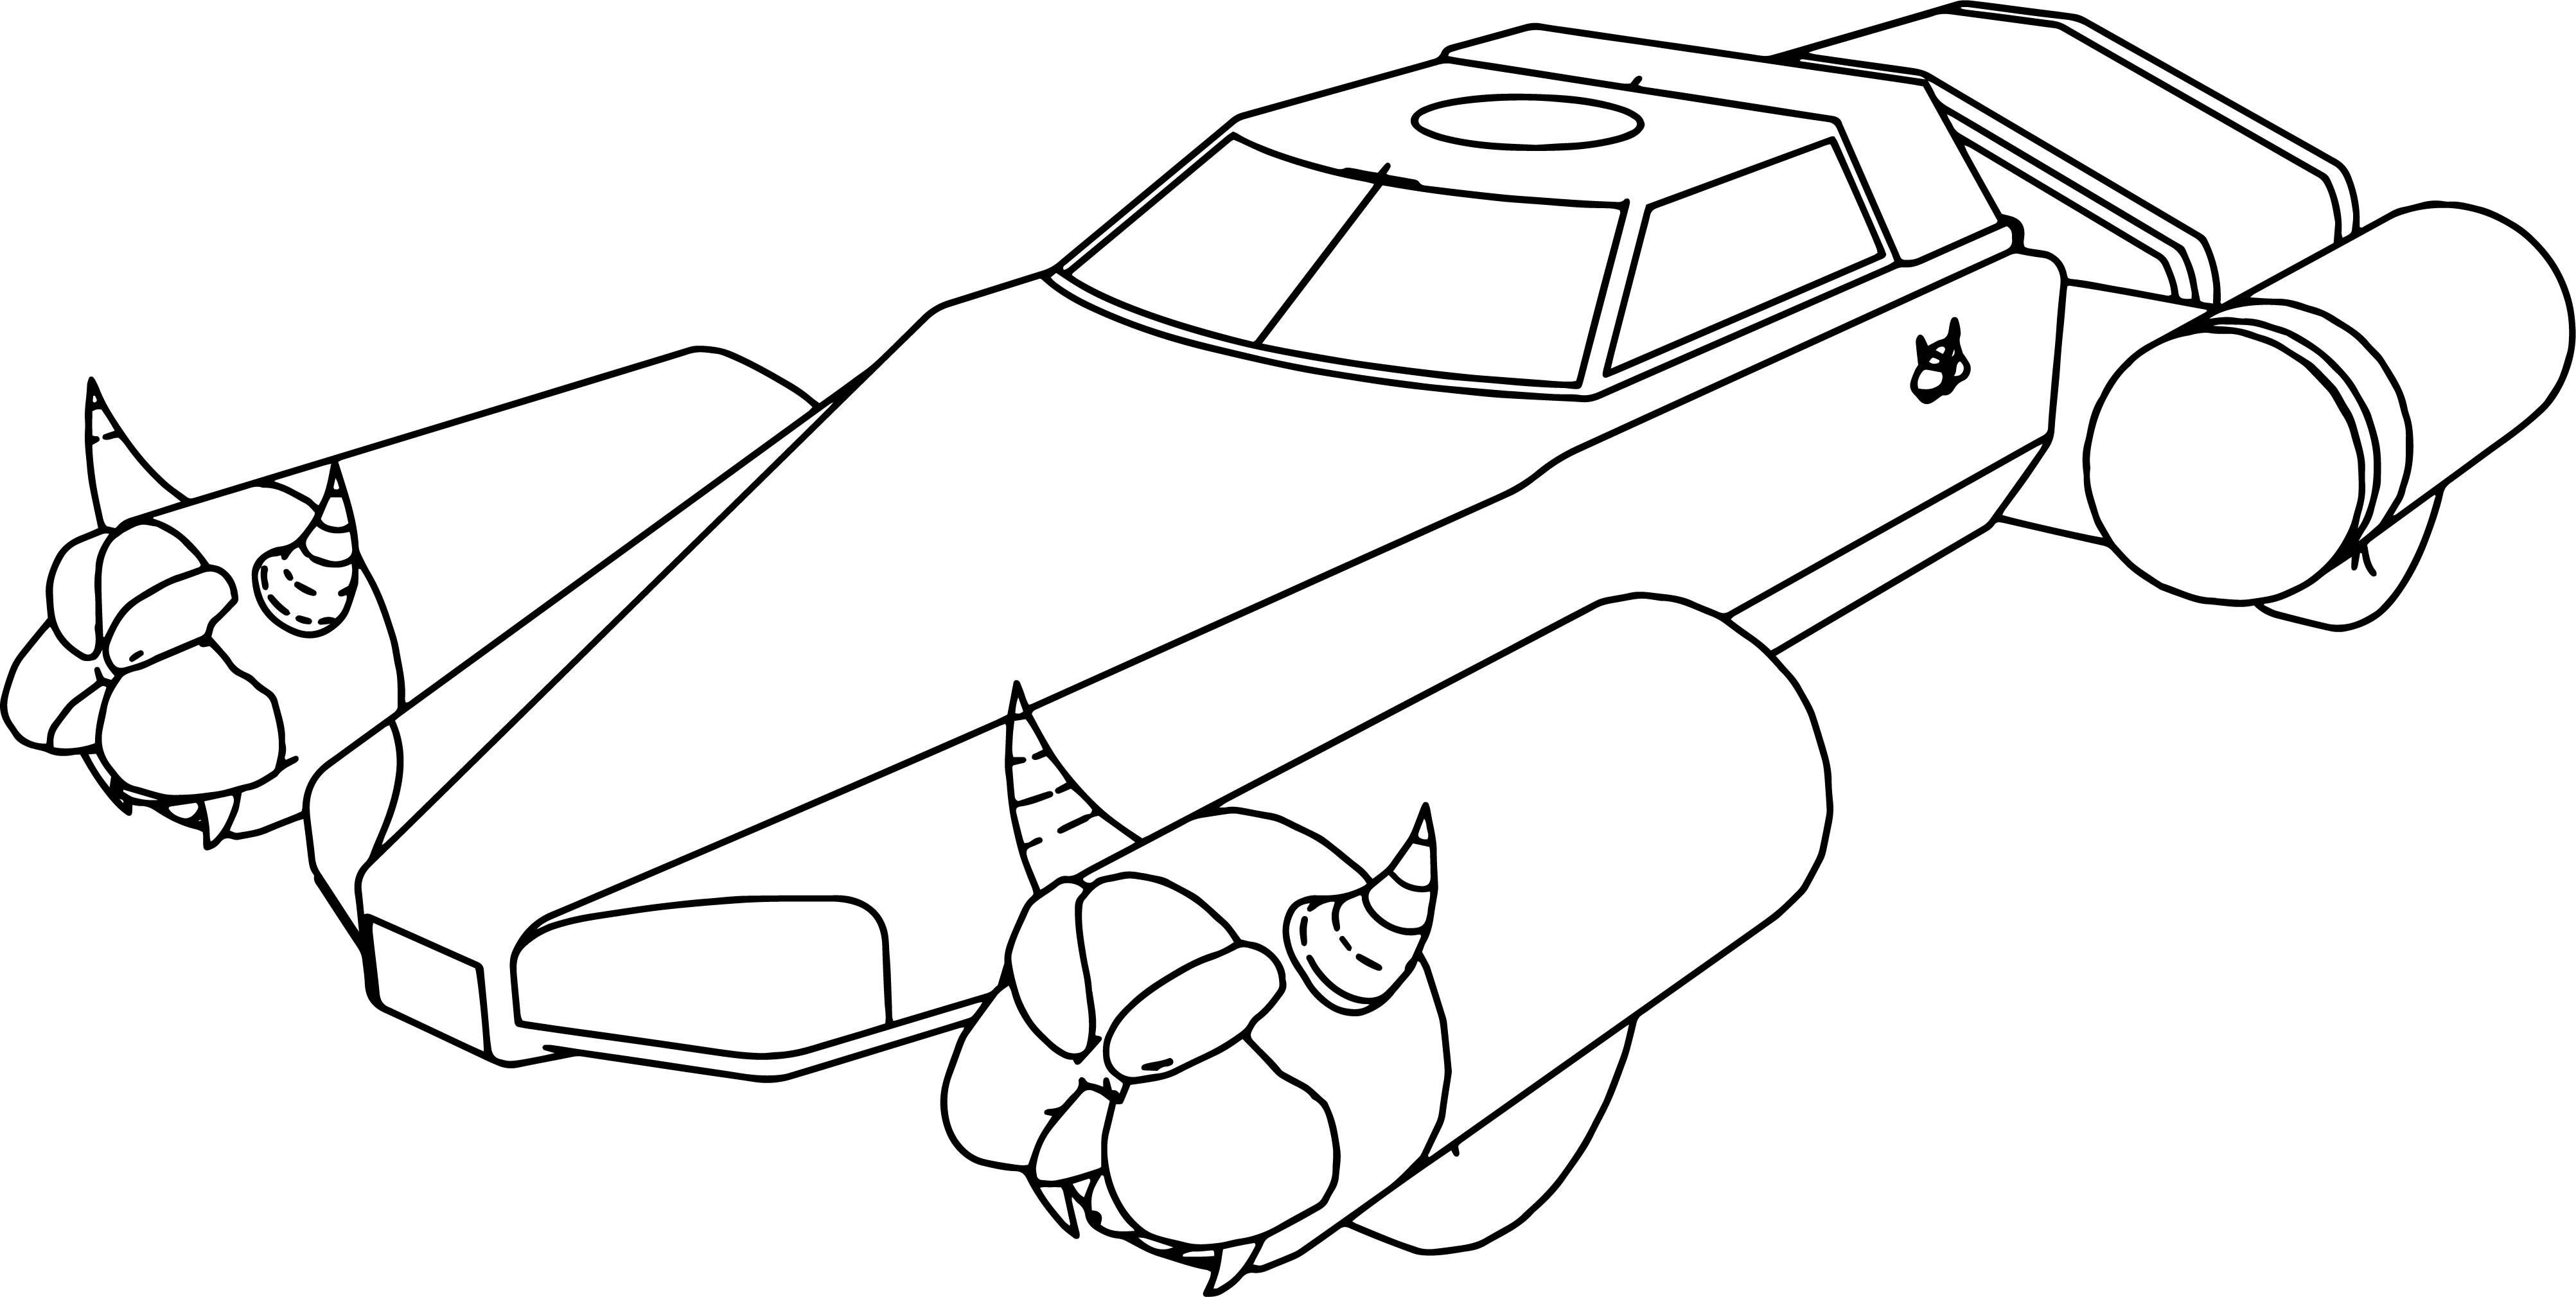 New York Jets Coloring Pages at GetColorings.com | Free printable